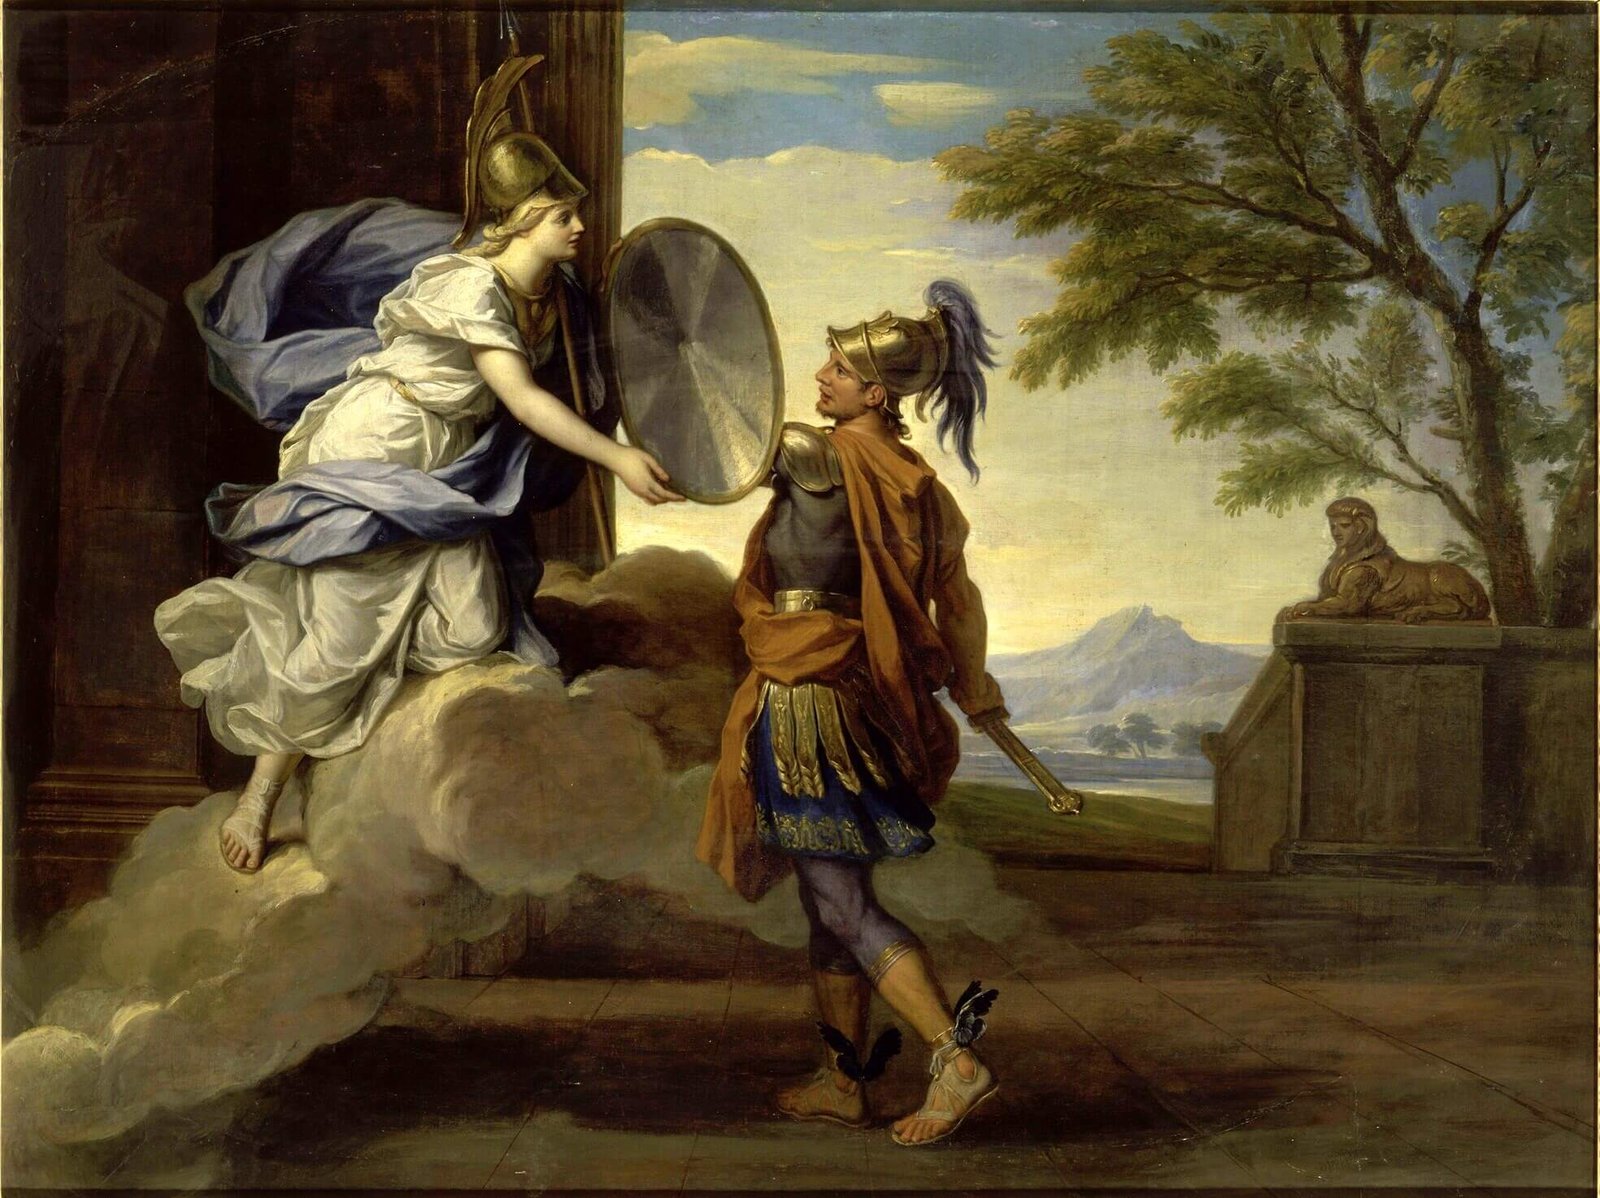 This painting represents Athena giving her shield to the Greek hero Perseus.